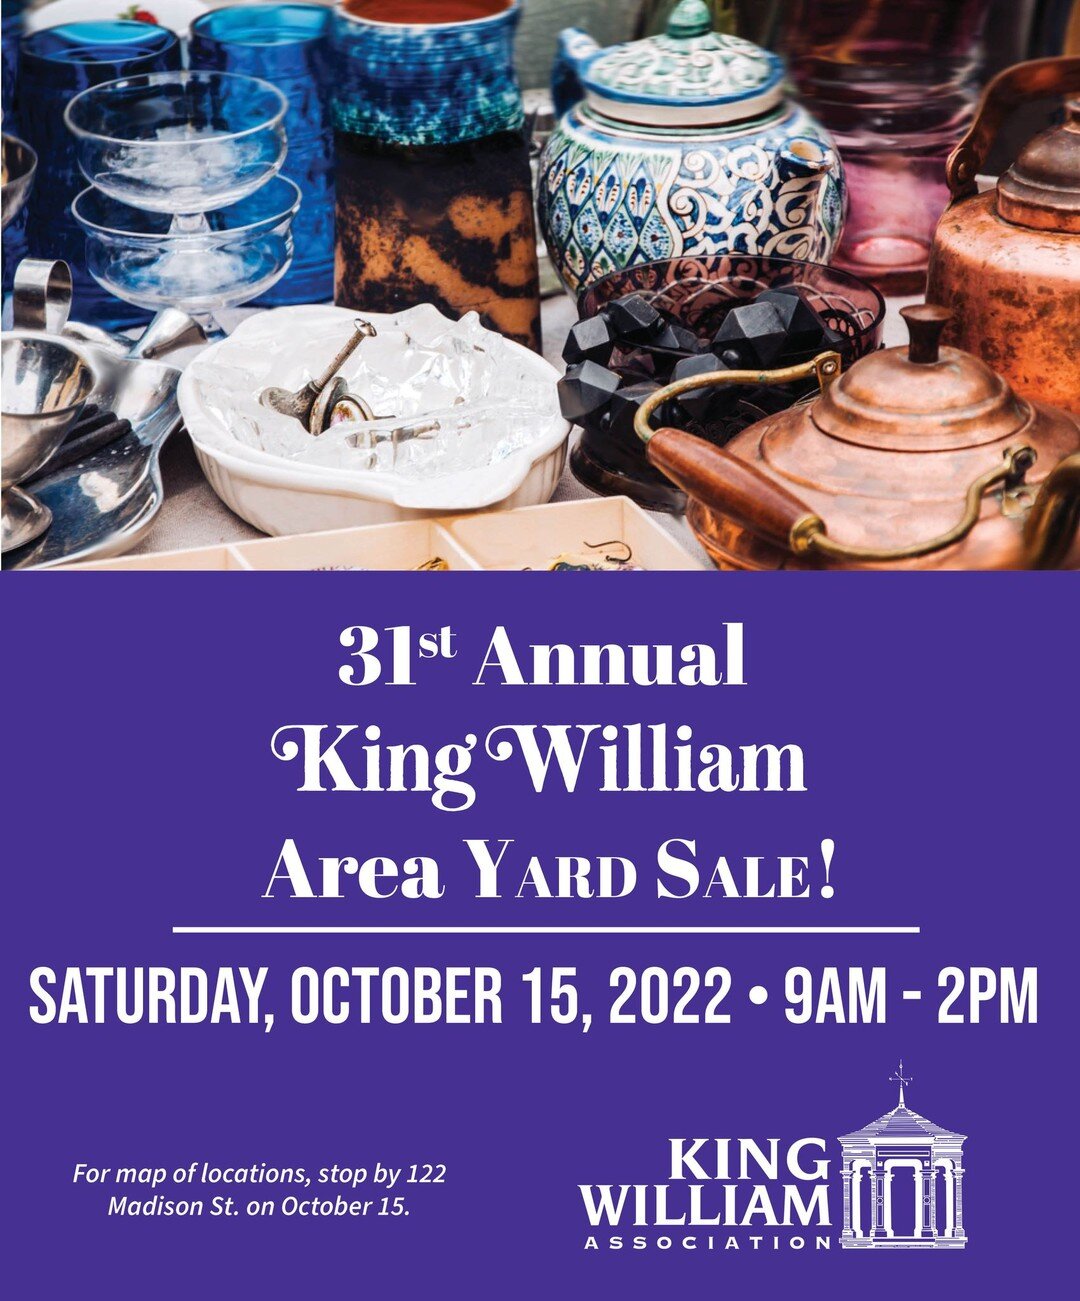 Mark your calendar for the 31st Annual King William Area Yard Sale on Saturday, October 15, 2022 from 9 a.m.- 2 p.m.! Maps displaying participating homes will be available at the King William office, 122 Madison St., the morning of October 15. 

Brin